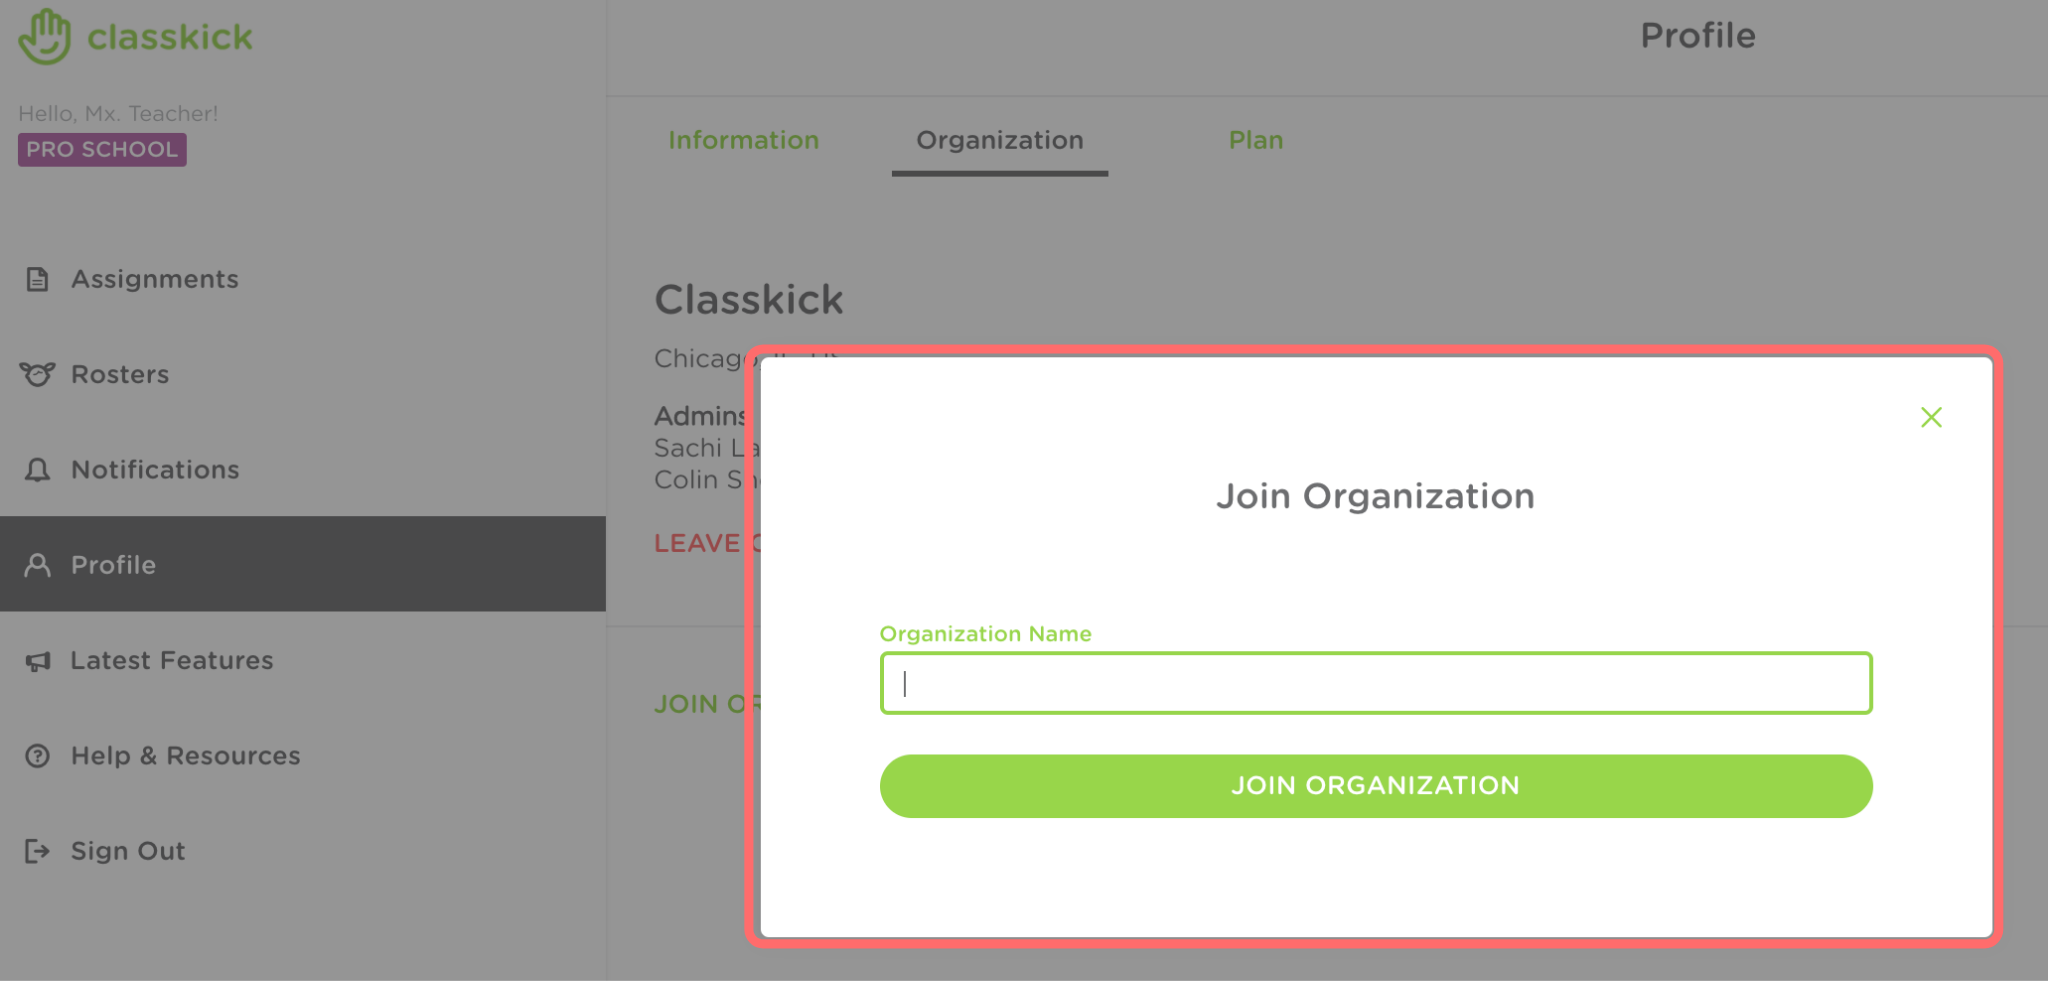 The Join Organization pop up window is outlined in red under the Profile and Organization tab.